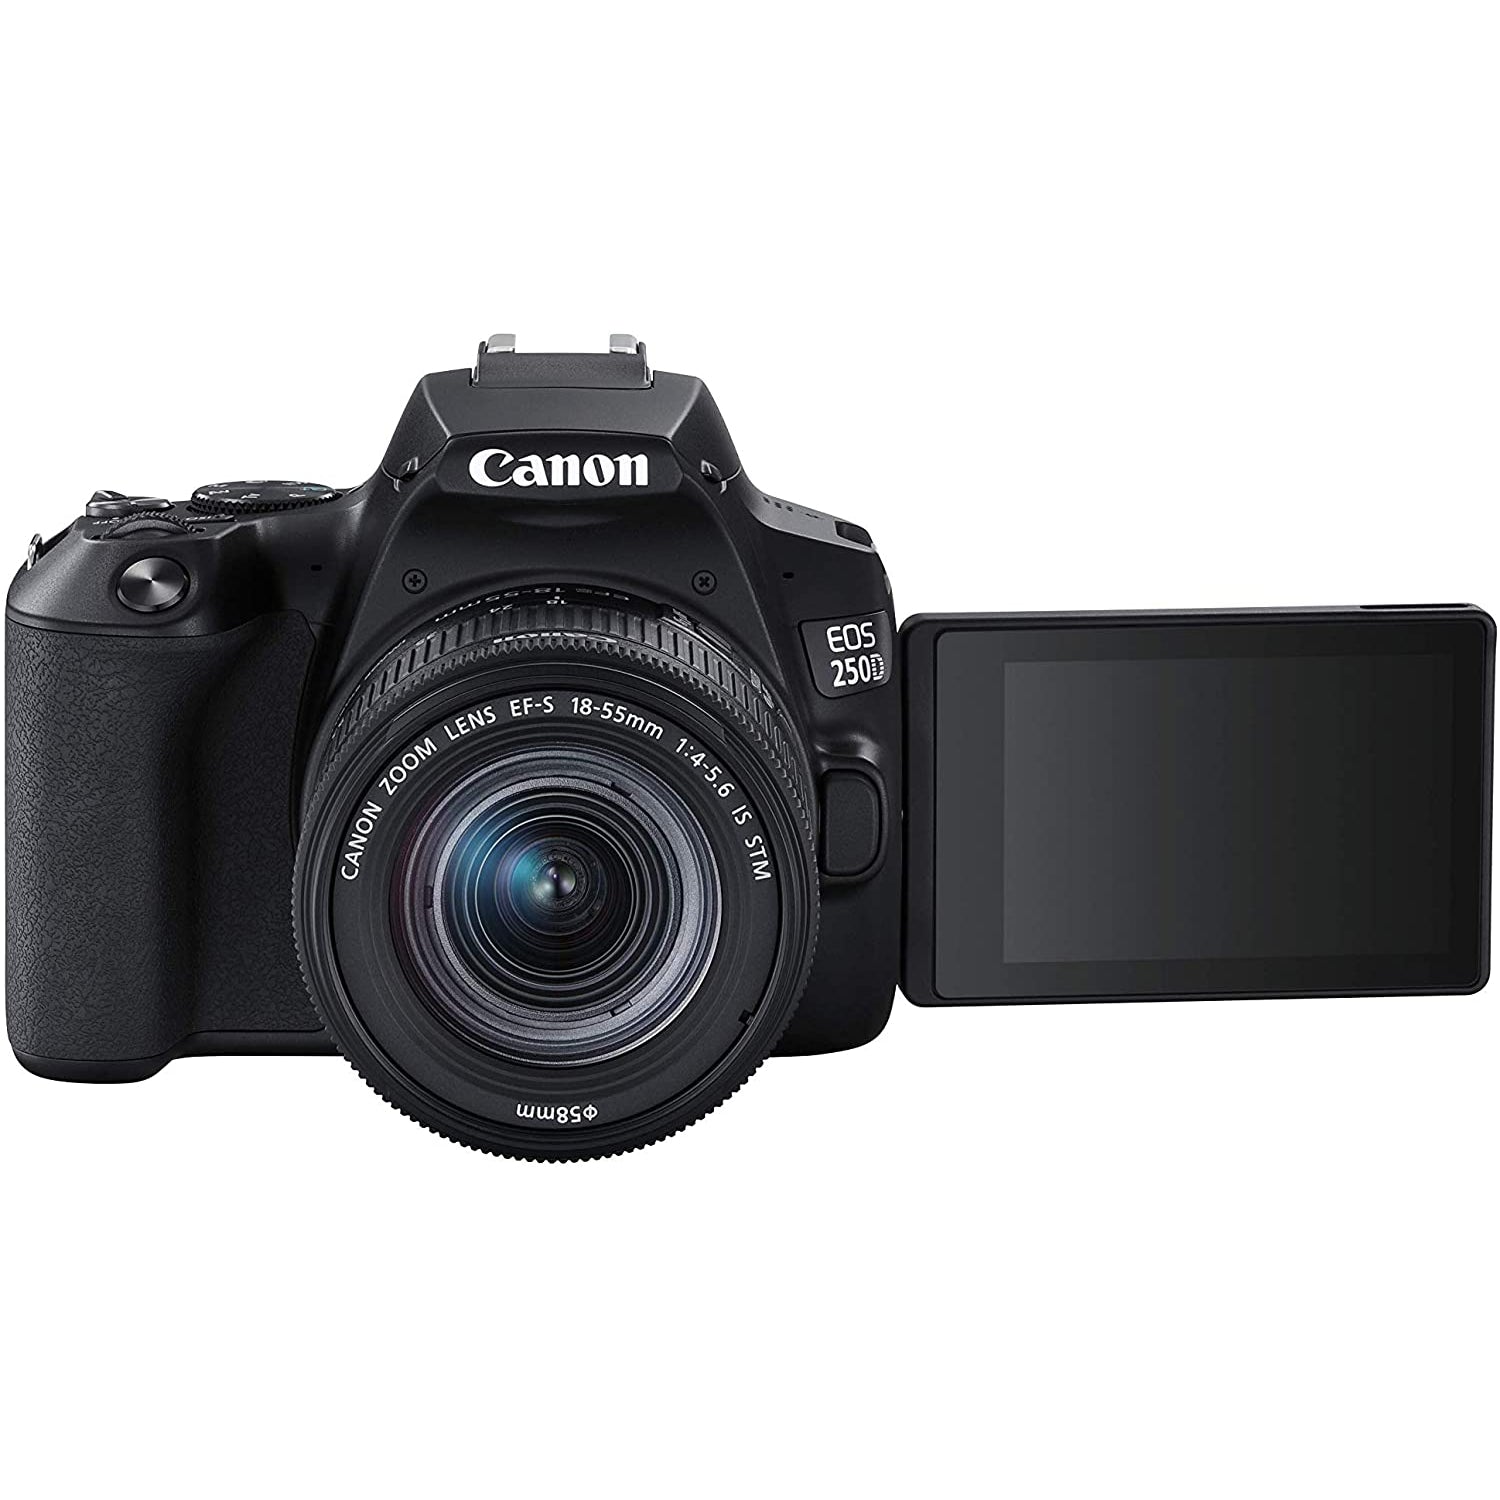 Canon EOS 250D DSLR Camera Body with 18-55mm III DC Lens, Black